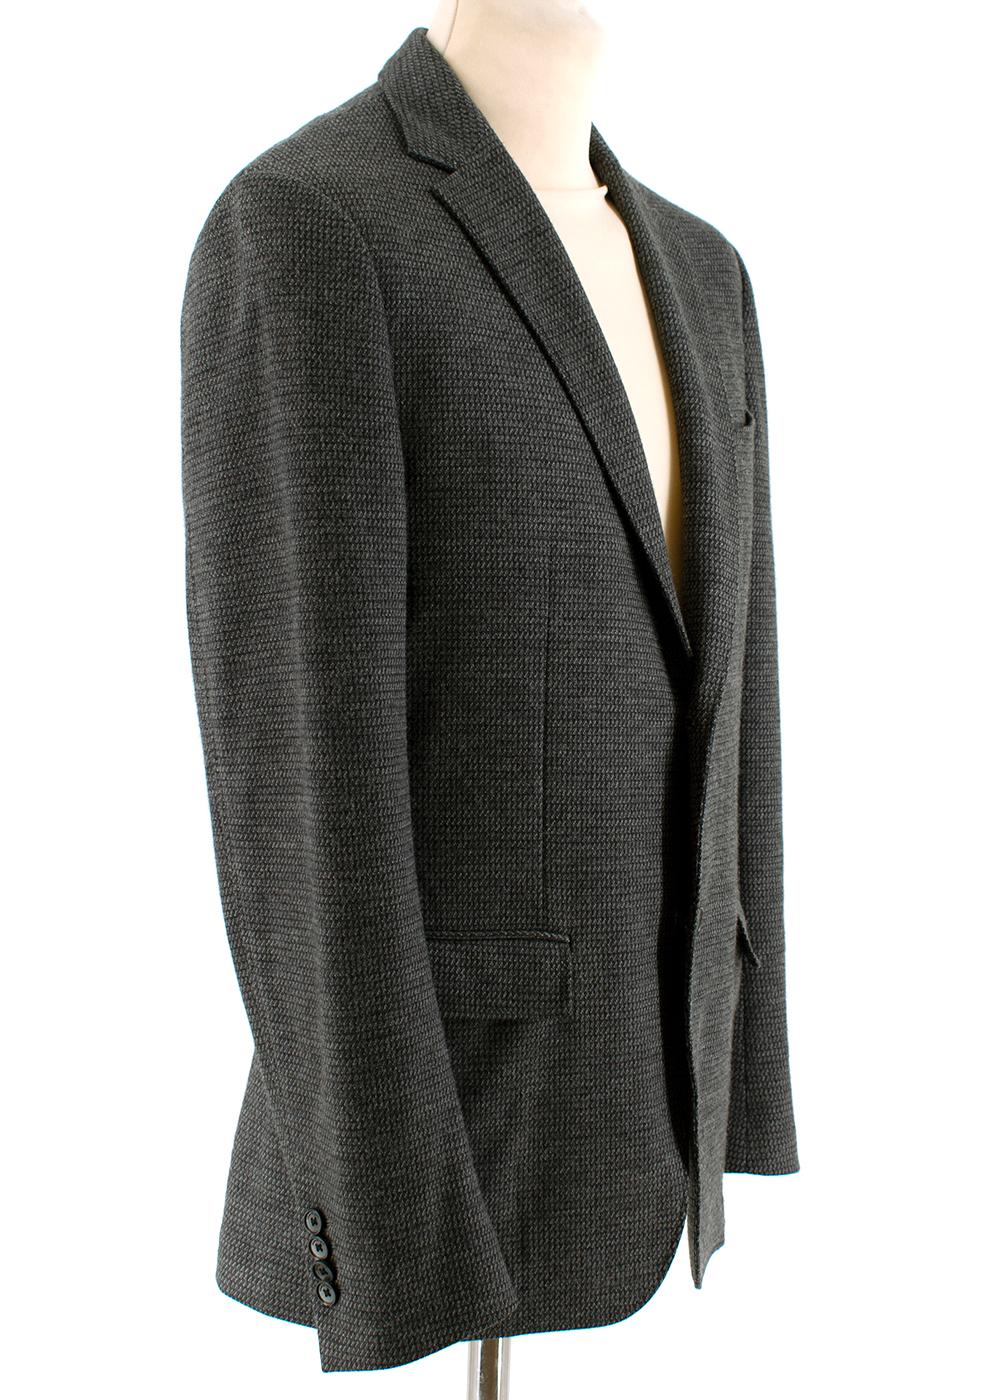 Salvatore Ferragamo Grey Wool Knit Single Breasted Blazer

- Notched lapel
- Two front pockets
- Single breasted
- Fully lined
- Padded shoulders

Materials:
Outer
100% Virgin Wool
Lining 
100% Cupro

Made in Italy

Measurements are taken laying